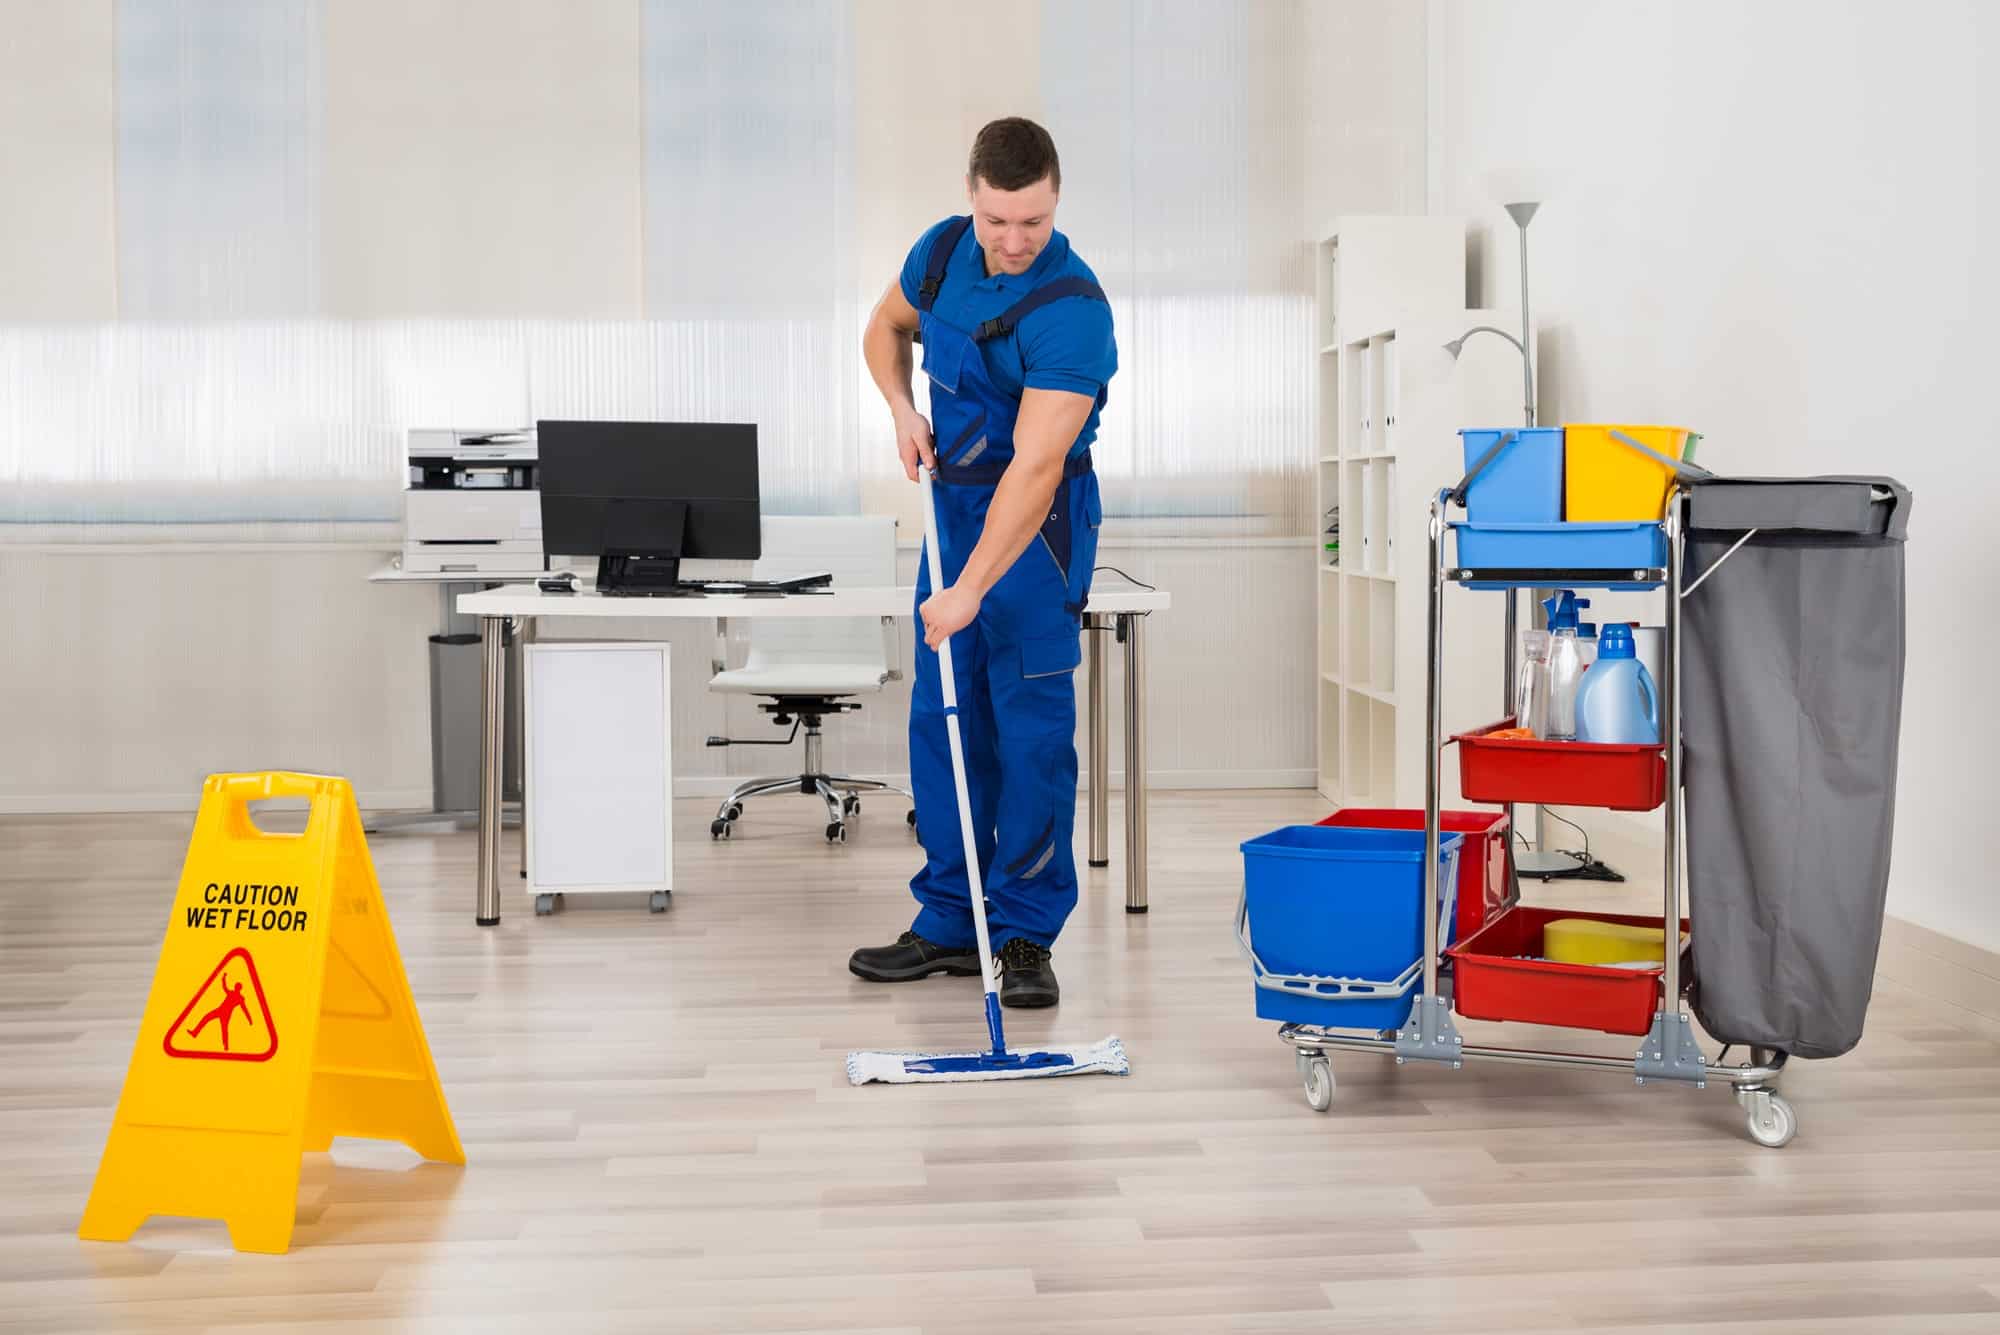 Orpo Cleaning Services, Residential Cleaning Massachusetts, Residential Cleaning MA, Residential Cleaning Newton Massachusetts, Residential Cleaning Newton MA, Residential Cleaning Needham Massachusetts, Residential Cleaning Needham MA, Residential Cleaning Wellesley Massachusetts, Residential Cleaning Wellesley MA, Residential Cleaning Waltham Massachusetts, Residential Cleaning Waltham MA, Residential Cleaning Chestnut Hill Massachusetts, Residential Cleaning Chestnut Hill MA, Residential Cleaning Auburndale Massachusetts, Residential Cleaning Auburndale MA, Residential Cleaning Watertown Massachusetts, Residential Cleaning Watertown MA, Move-Out & Move- In Cleaning Newton Massachusetts, Move-Out & Move- In Cleaning Newton MA, Move-Out & Move- In Cleaning Needham Massachusetts, Move-Out & Move- In Cleaning Needham MA, Move-Out & Move- In Cleaning Wellesley Massachusetts, Move-Out & Move- In Cleaning Wellesley MA, Move-Out & Move- In Cleaning Waltham Massachusetts, Move-Out & Move- In Cleaning Waltham MA, Move-Out & Move- In Cleaning Chestnut Hill Massachusetts, Move-Out & Move- In Cleaning Chestnut Hill MA, Move-Out & Move- In Cleaning Auburndale Massachusetts, Move-Out & Move- In Cleaning Auburndale MA, Move-Out & Move- In Cleaning Watertown Massachusetts, Move-Out & Move- In Cleaning Watertown MA, Deep cleaning Newton Massachusetts, Deep cleaning Newton MA, Deep cleaning Needham Massachusetts, Deep cleaning Needham MA, Deep cleaning Wellesley Massachusetts, Deep cleaning Wellesley MA, Deep cleaning Waltham Massachusetts, Deep cleaning Waltham MA, Deep cleaning Chestnut Hill Massachusetts, Deep cleaning Chestnut Hill MA, Deep cleaning Auburndale Massachusetts, Deep cleaning Auburndale MA, Deep cleaning Watertown Massachusetts, Deep cleaning Watertown MA, House Cleaning Newton Massachusetts, House Cleaning Newton MA, House Cleaning Needham Massachusetts, House Cleaning Needham MA, House Cleaning Wellesley Massachusetts, House Cleaning Wellesley MA, House Cleaning Waltham Massachusetts, House Cleaning Waltham MA, House Cleaning Chestnut Hill Massachusetts, House Cleaning Chestnut Hill MA, House Cleaning Auburndale Massachusetts, House Cleaning Auburndale MA, House Cleaning Watertown Massachusetts, House Cleaning Watertown MA, Commercial Cleaning Newton Massachusetts, Commercial Cleaning Newton MA, Commercial Cleaning Needham Massachusetts, Commercial Cleaning Needham MA, Commercial Cleaning Wellesley Massachusetts, Commercial Cleaning Wellesley MA, Commercial Cleaning Waltham Massachusetts, Commercial Cleaning Waltham MA, Commercial Cleaning Chestnut Hill Massachusetts, Commercial Cleaning Chestnut Hill MA, Commercial Cleaning Auburndale Massachusetts, Commercial Cleaning Auburndale MA, Commercial Cleaning Watertown Massachusetts, Commercial Cleaning Watertown MA,